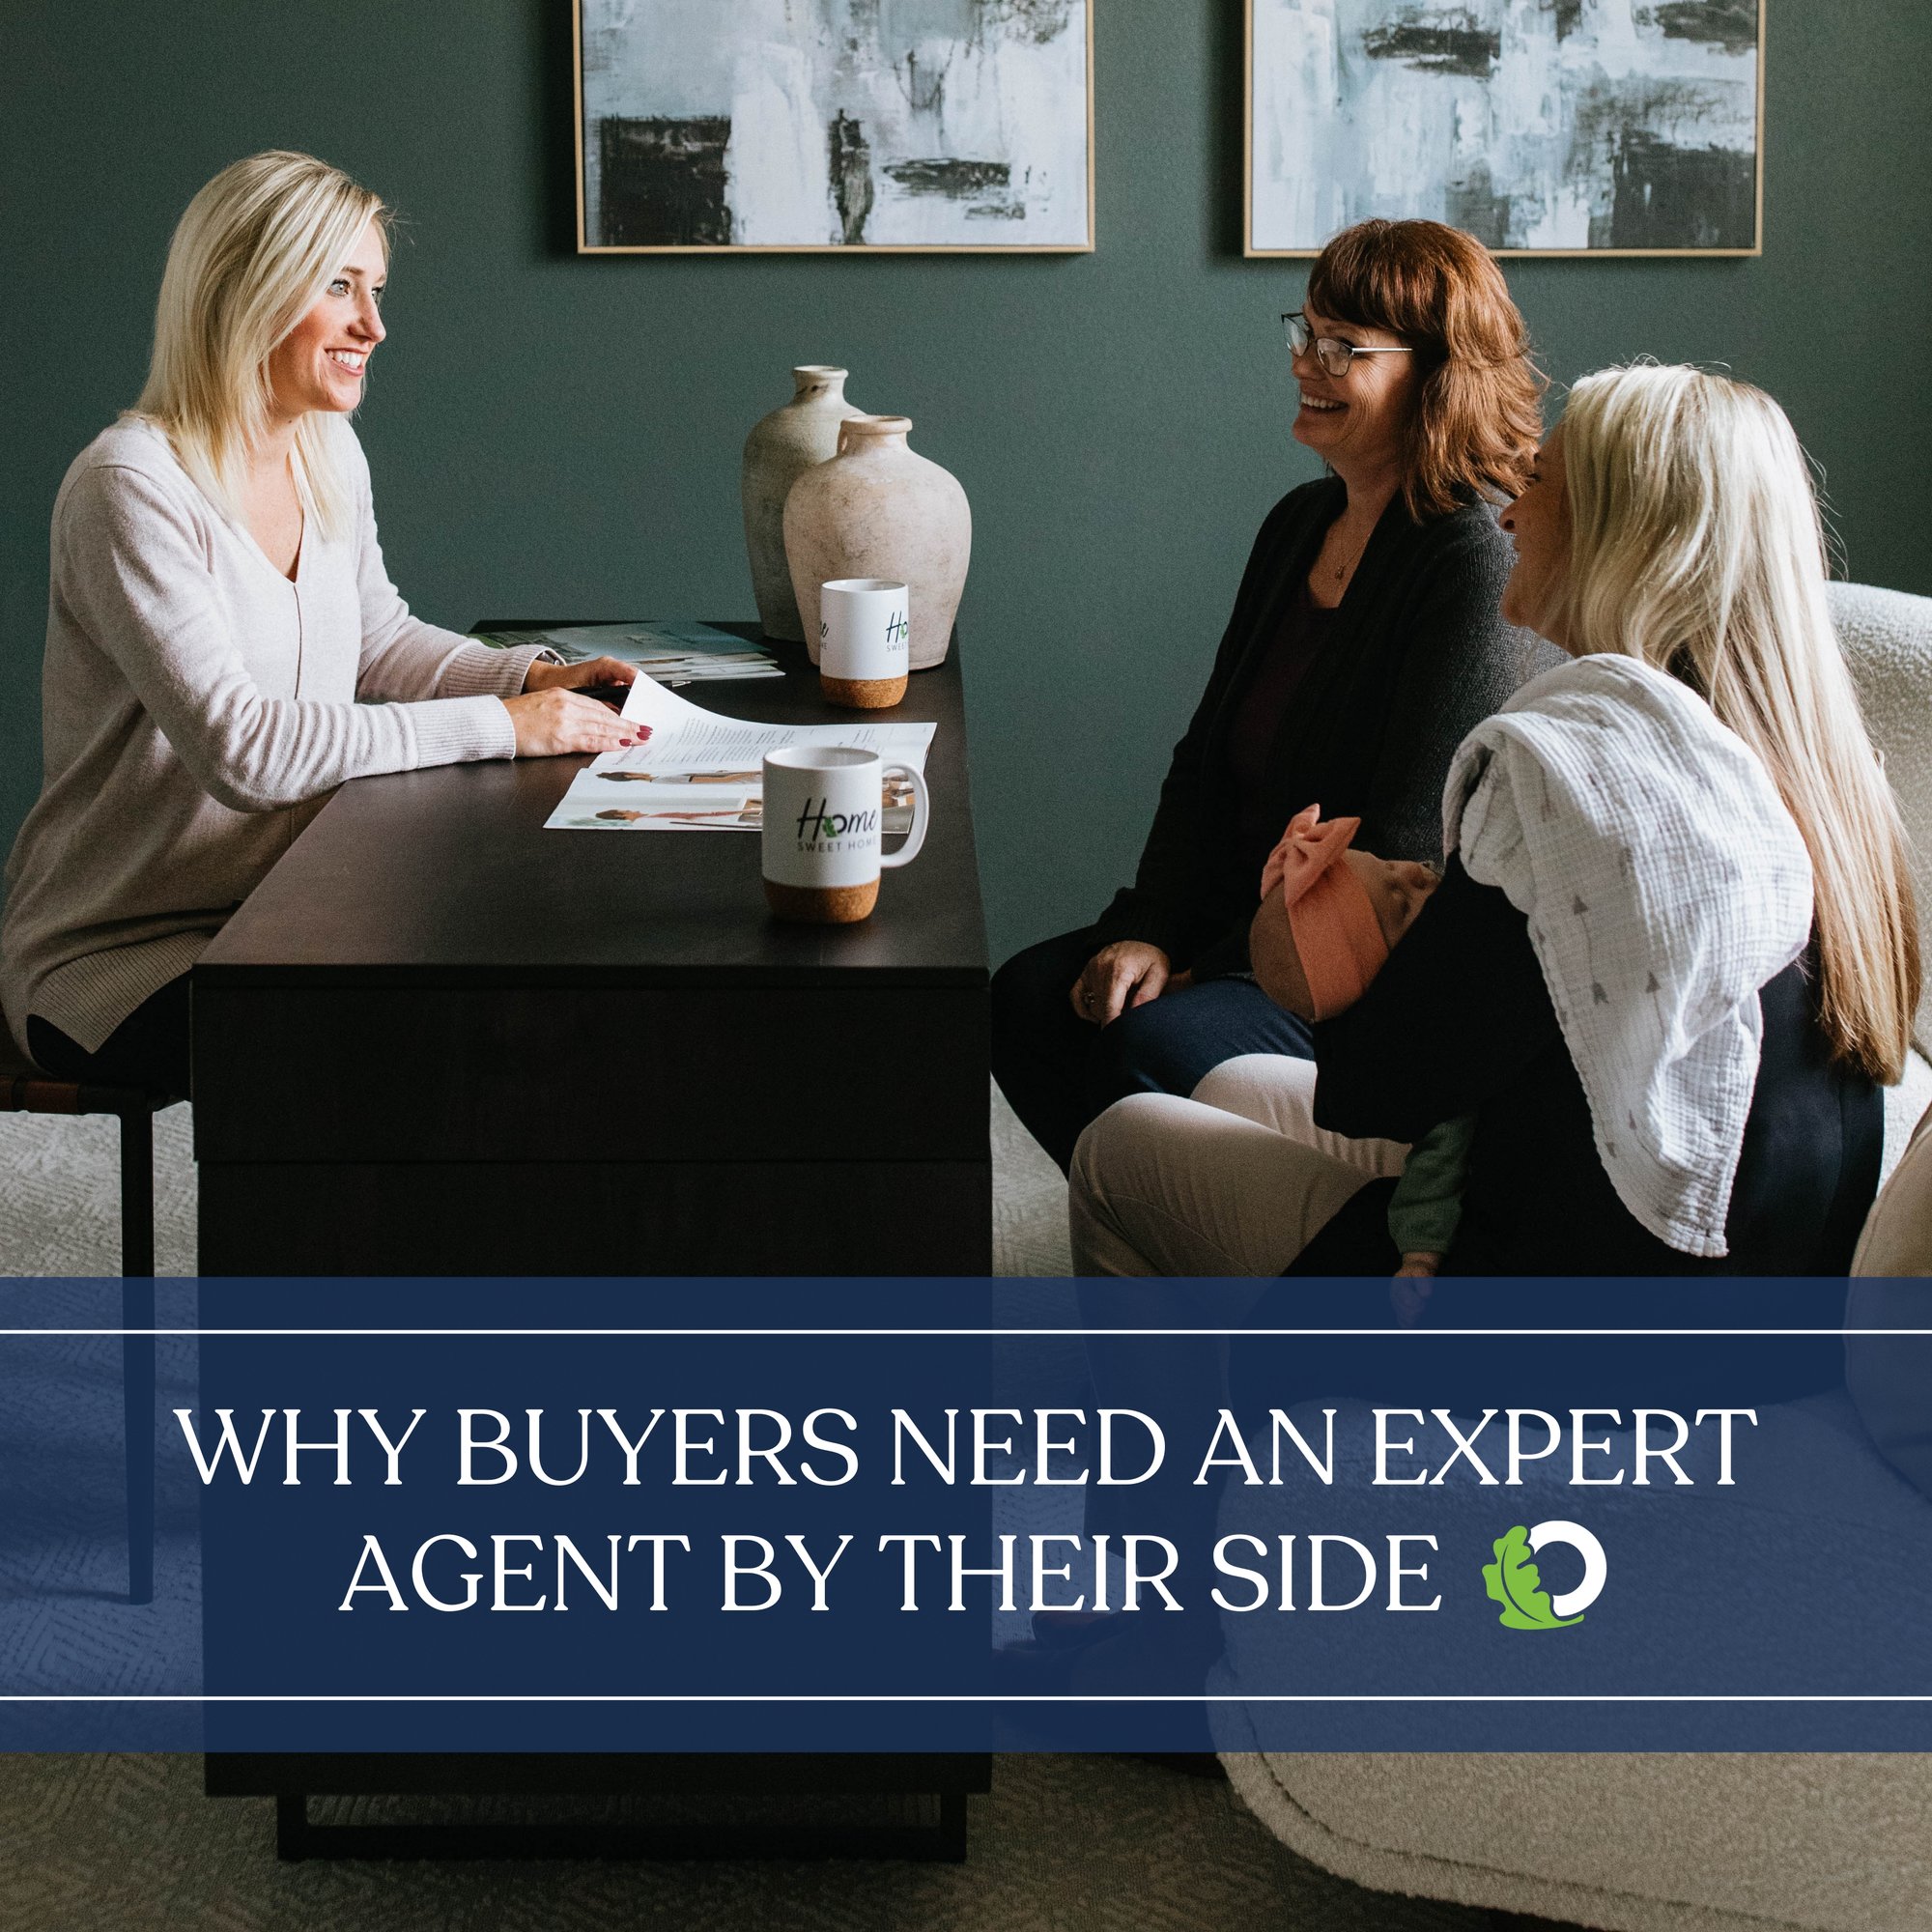 Why Buyers Need an Expert Agent by Their Side